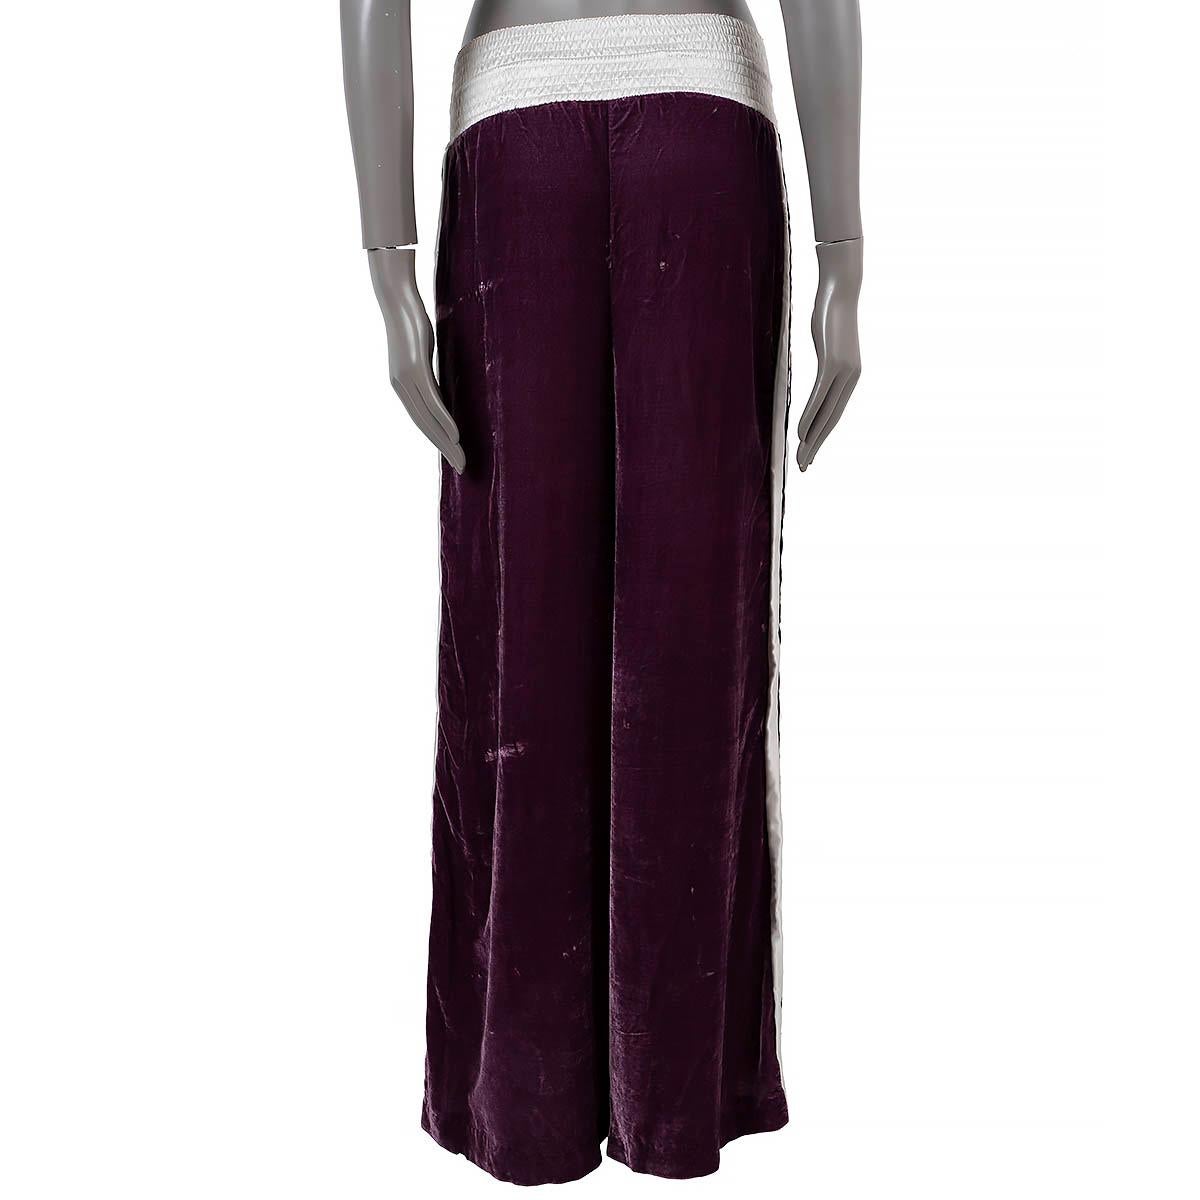 OFF-WHITE purple 2017 SATIN-TRIM CRUSHED VELVET TRACK Pants 36 XXS In Excellent Condition For Sale In Zürich, CH